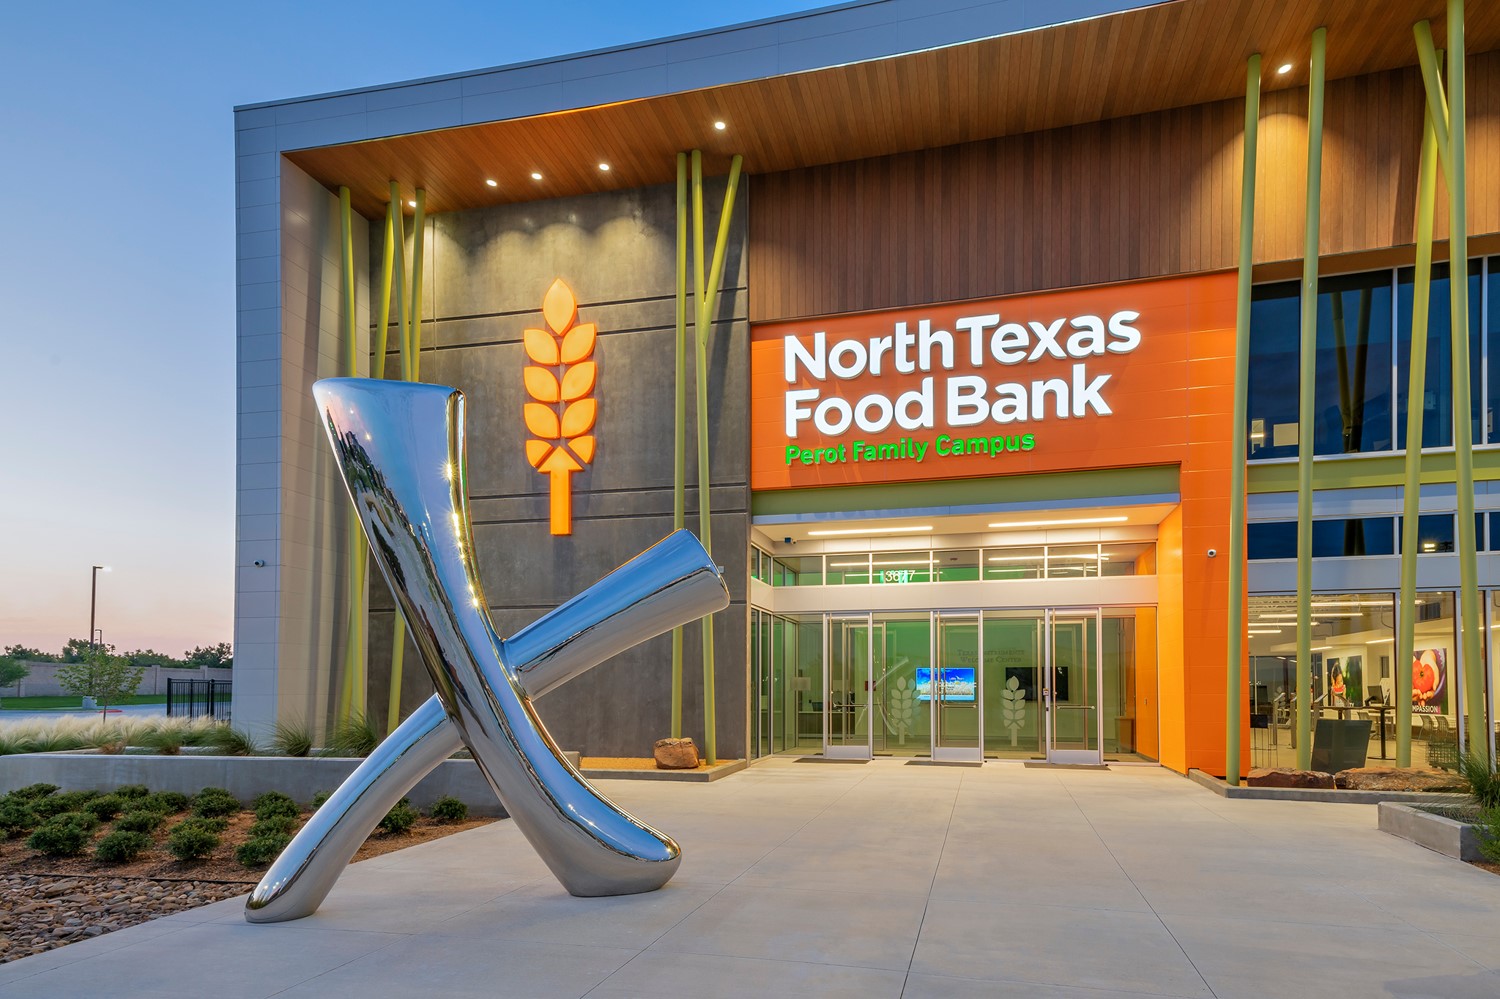 Photo courtesy of Brad Oldham. 
The North Texas Food Bank's Perot Family Campus in Plano is centrally located within the Food Bank's 13-county service area. Thanks to tremendous community support and the tenacity of staff and partners, NTFB has met their meal distribution goal of 92 million meals. 